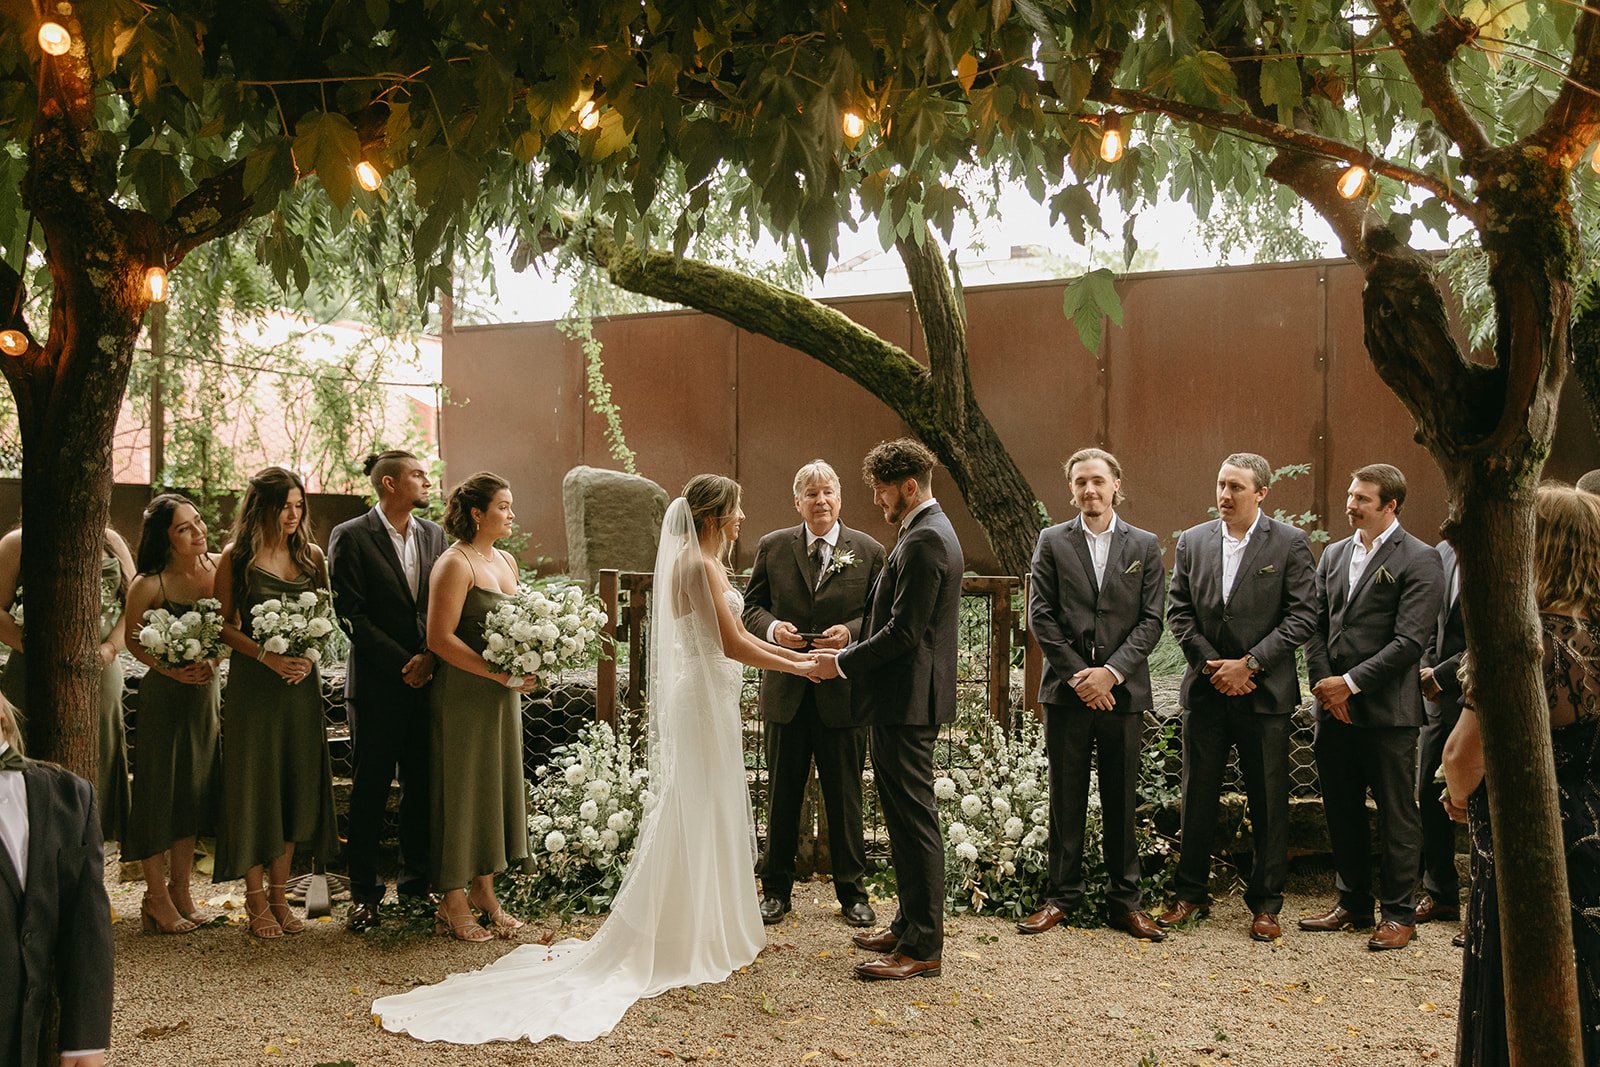 Bride and groom exchanging vows in their outdoor ceremony